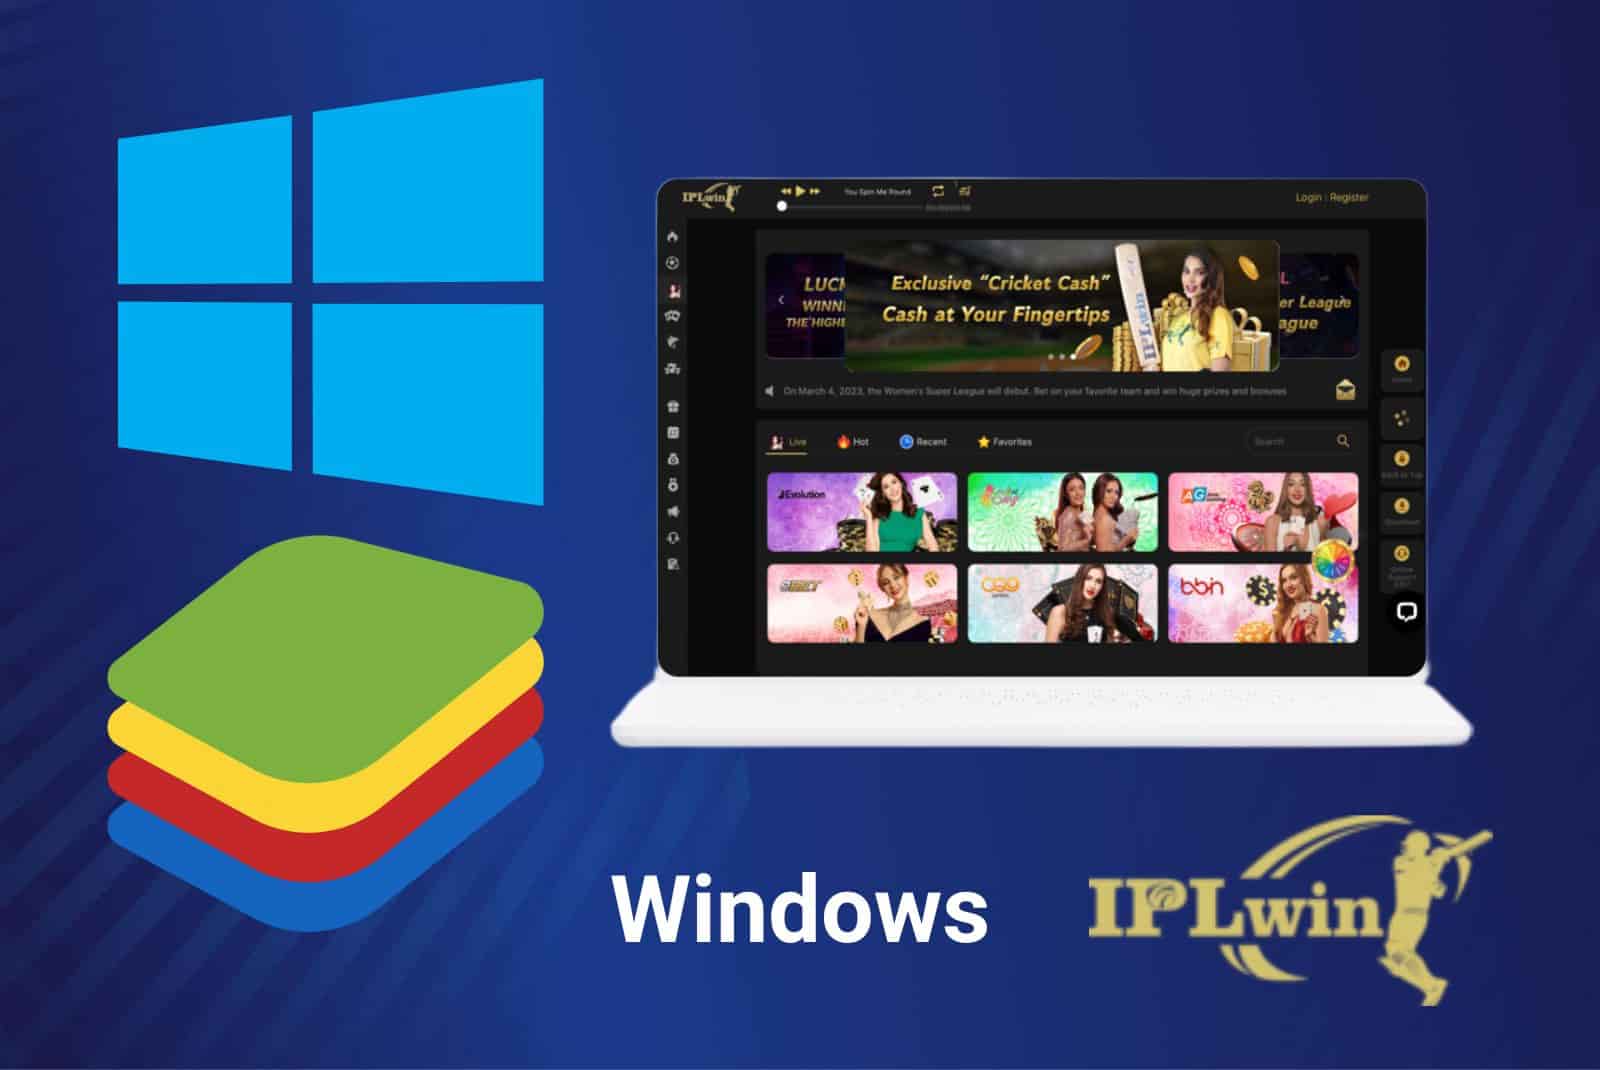 How to plat IPLwin India on Windows computer